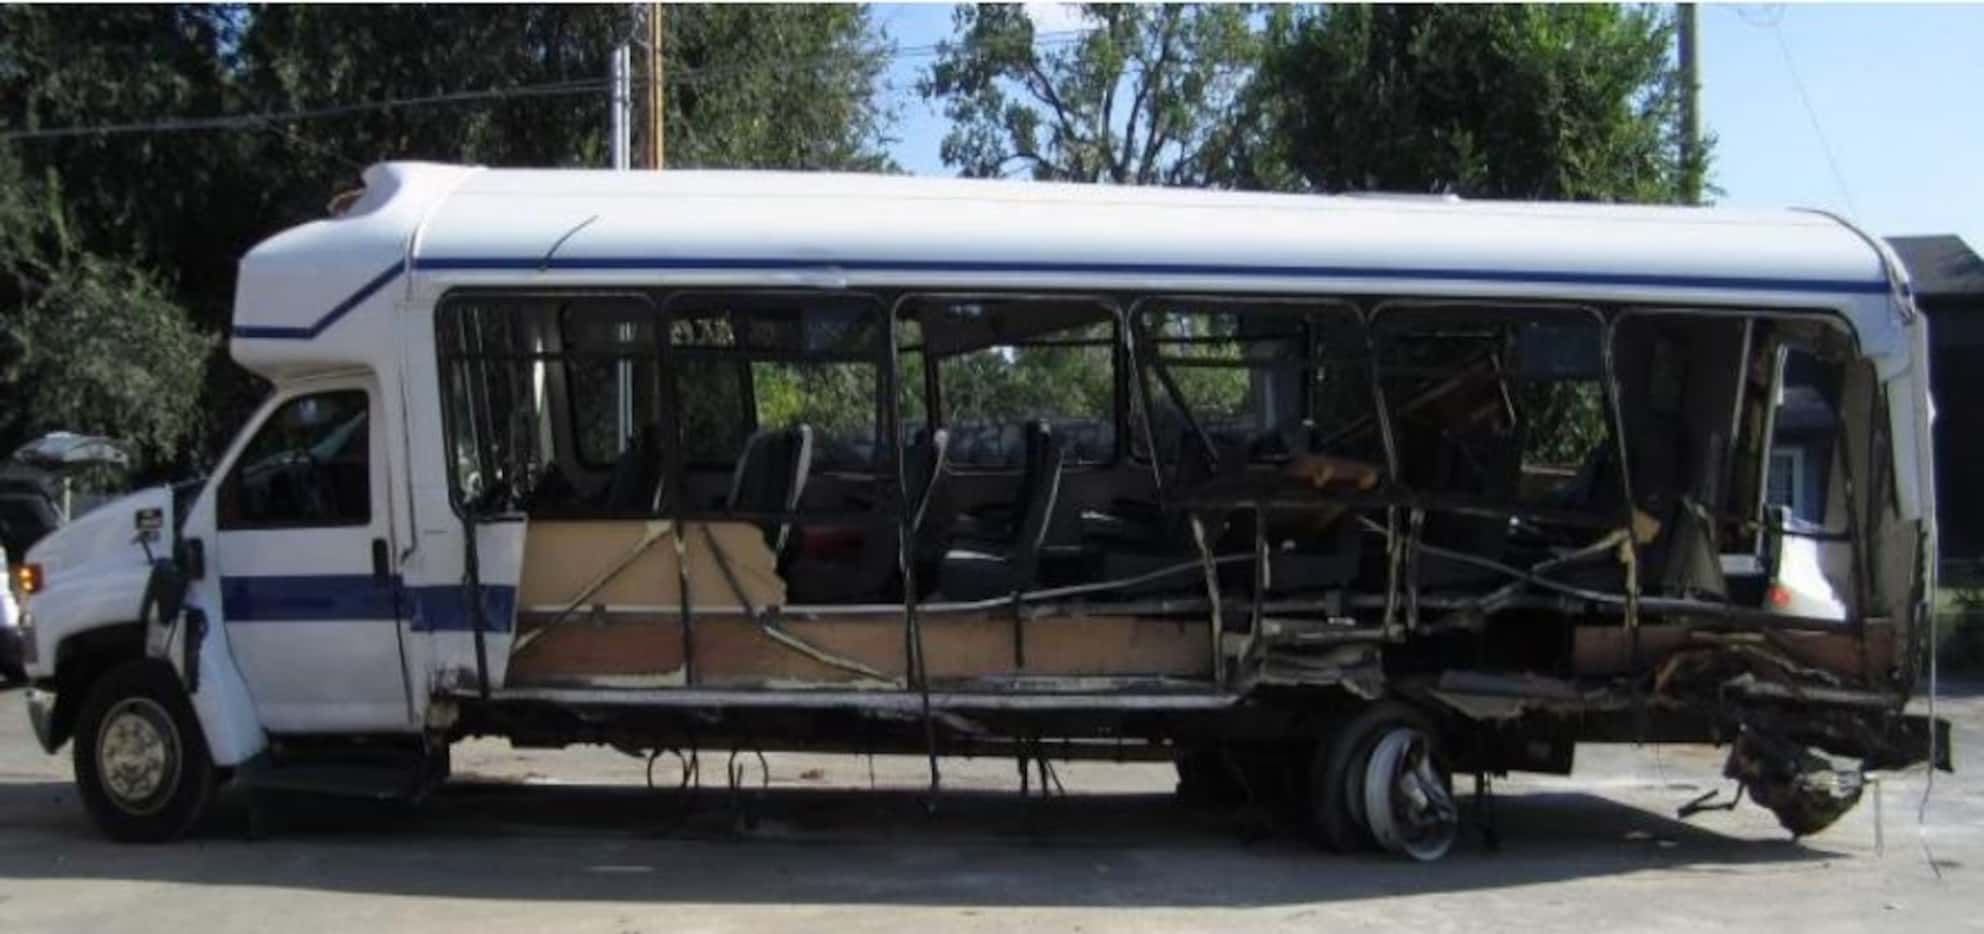 The 2008 Champion Defender bus is shown as it looked after the crash.